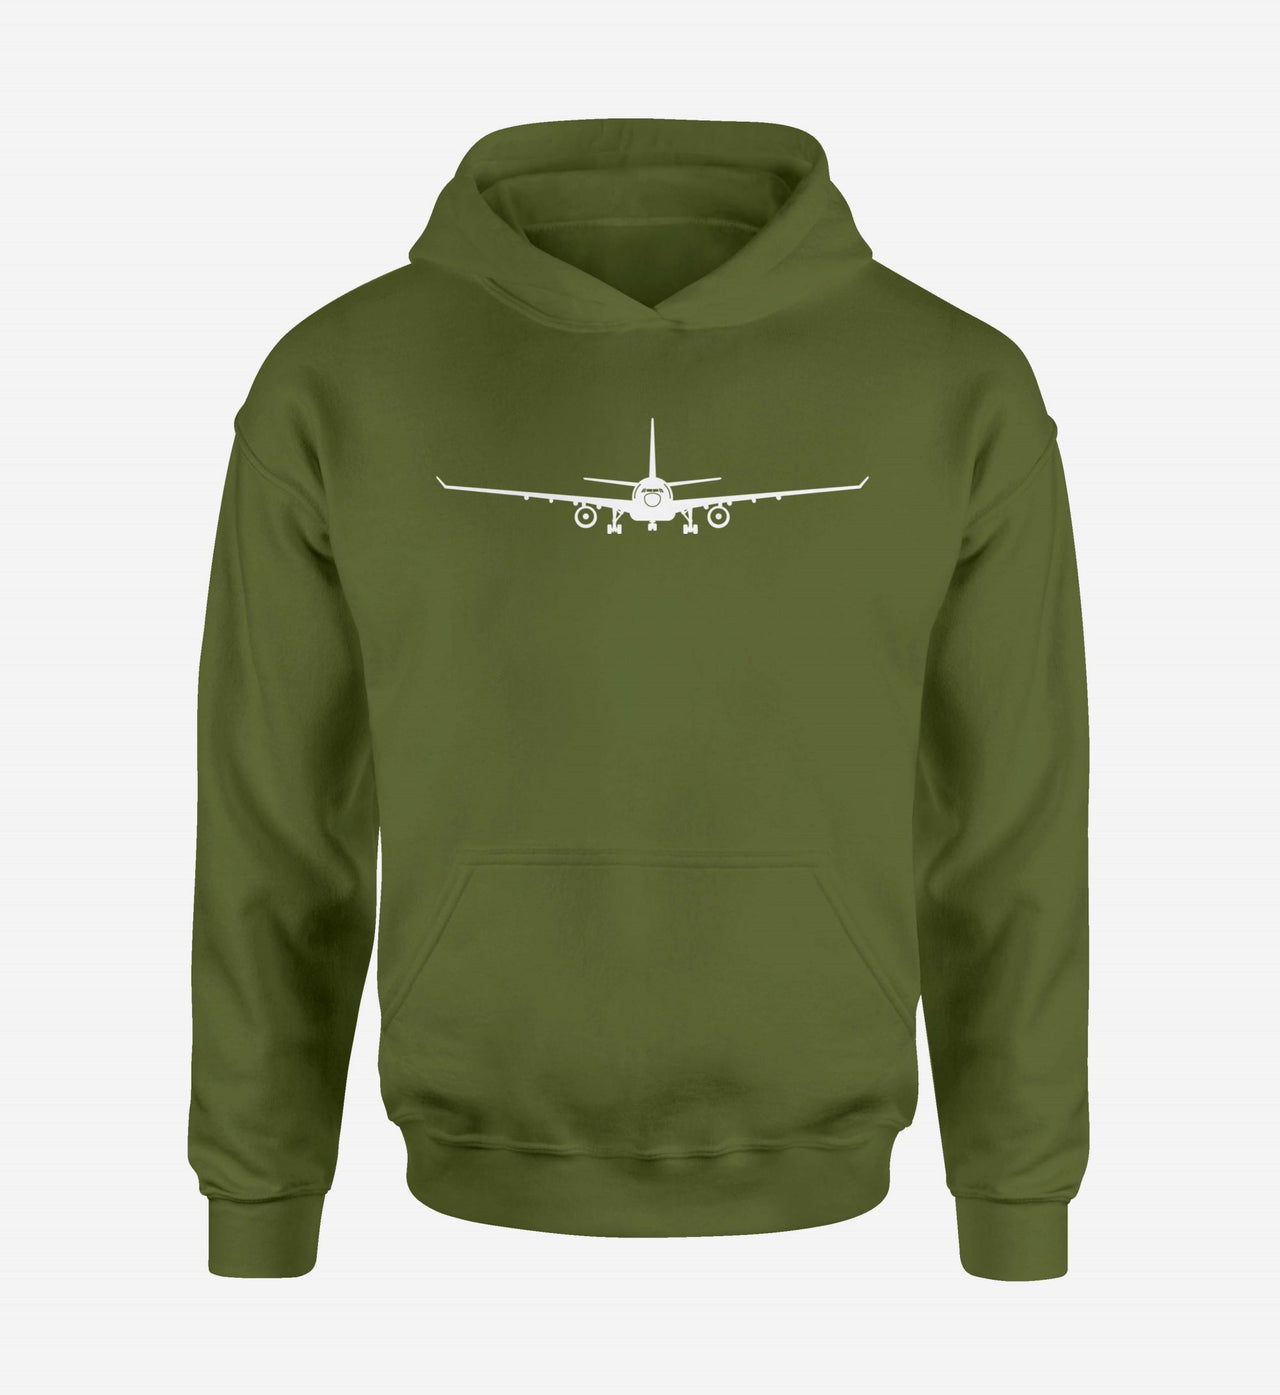 Airbus A330 Silhouette Designed Hoodies